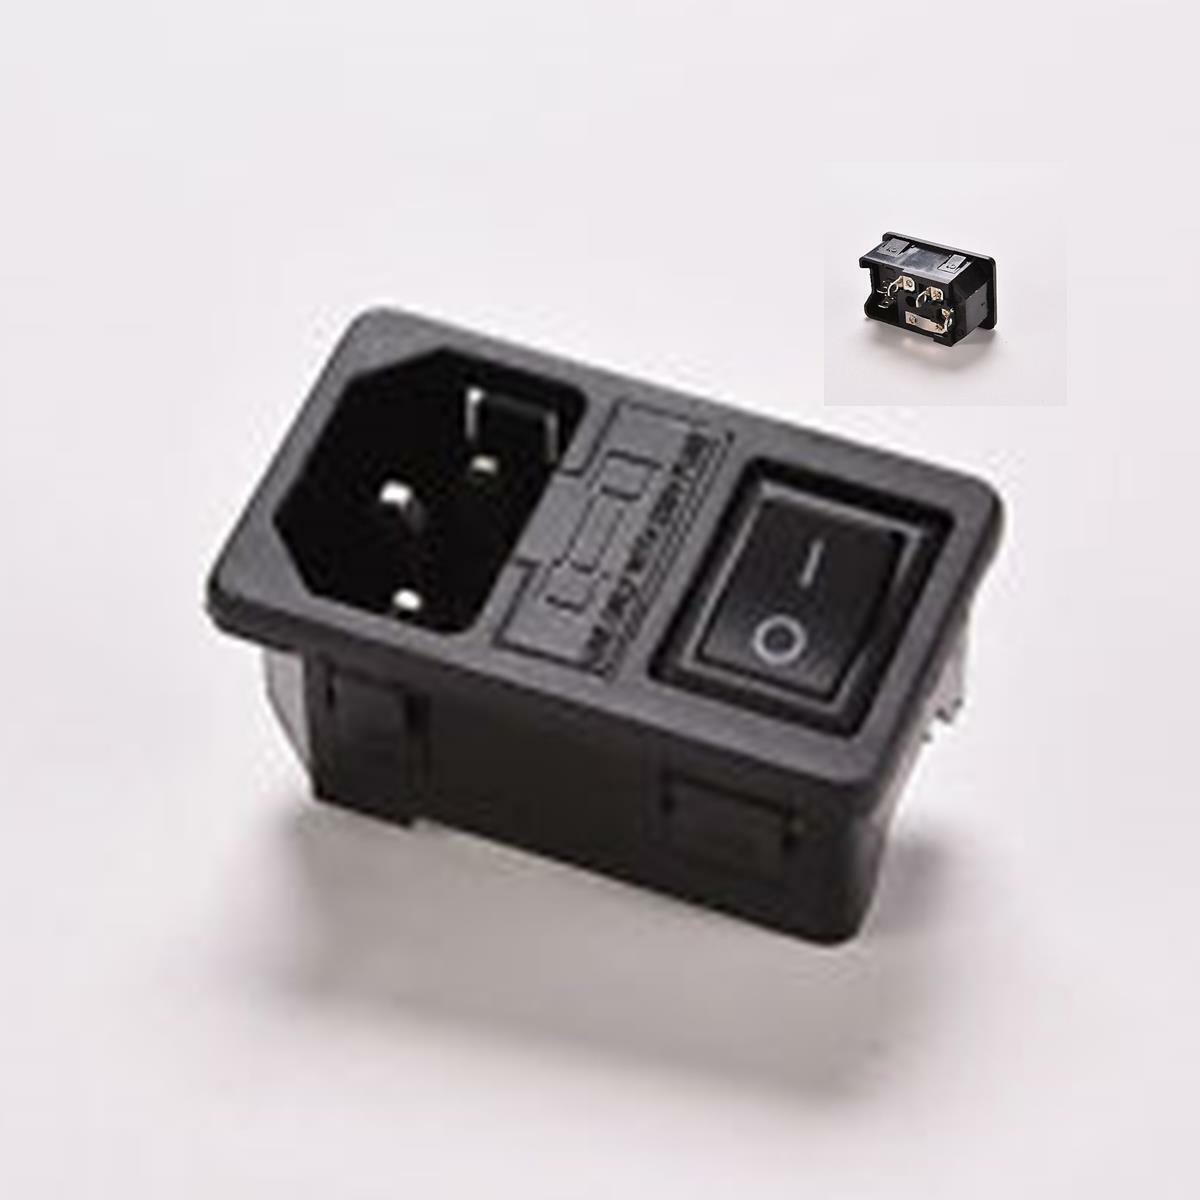 Flush mount // surface mount power socket - Electrical engineering supply NEW